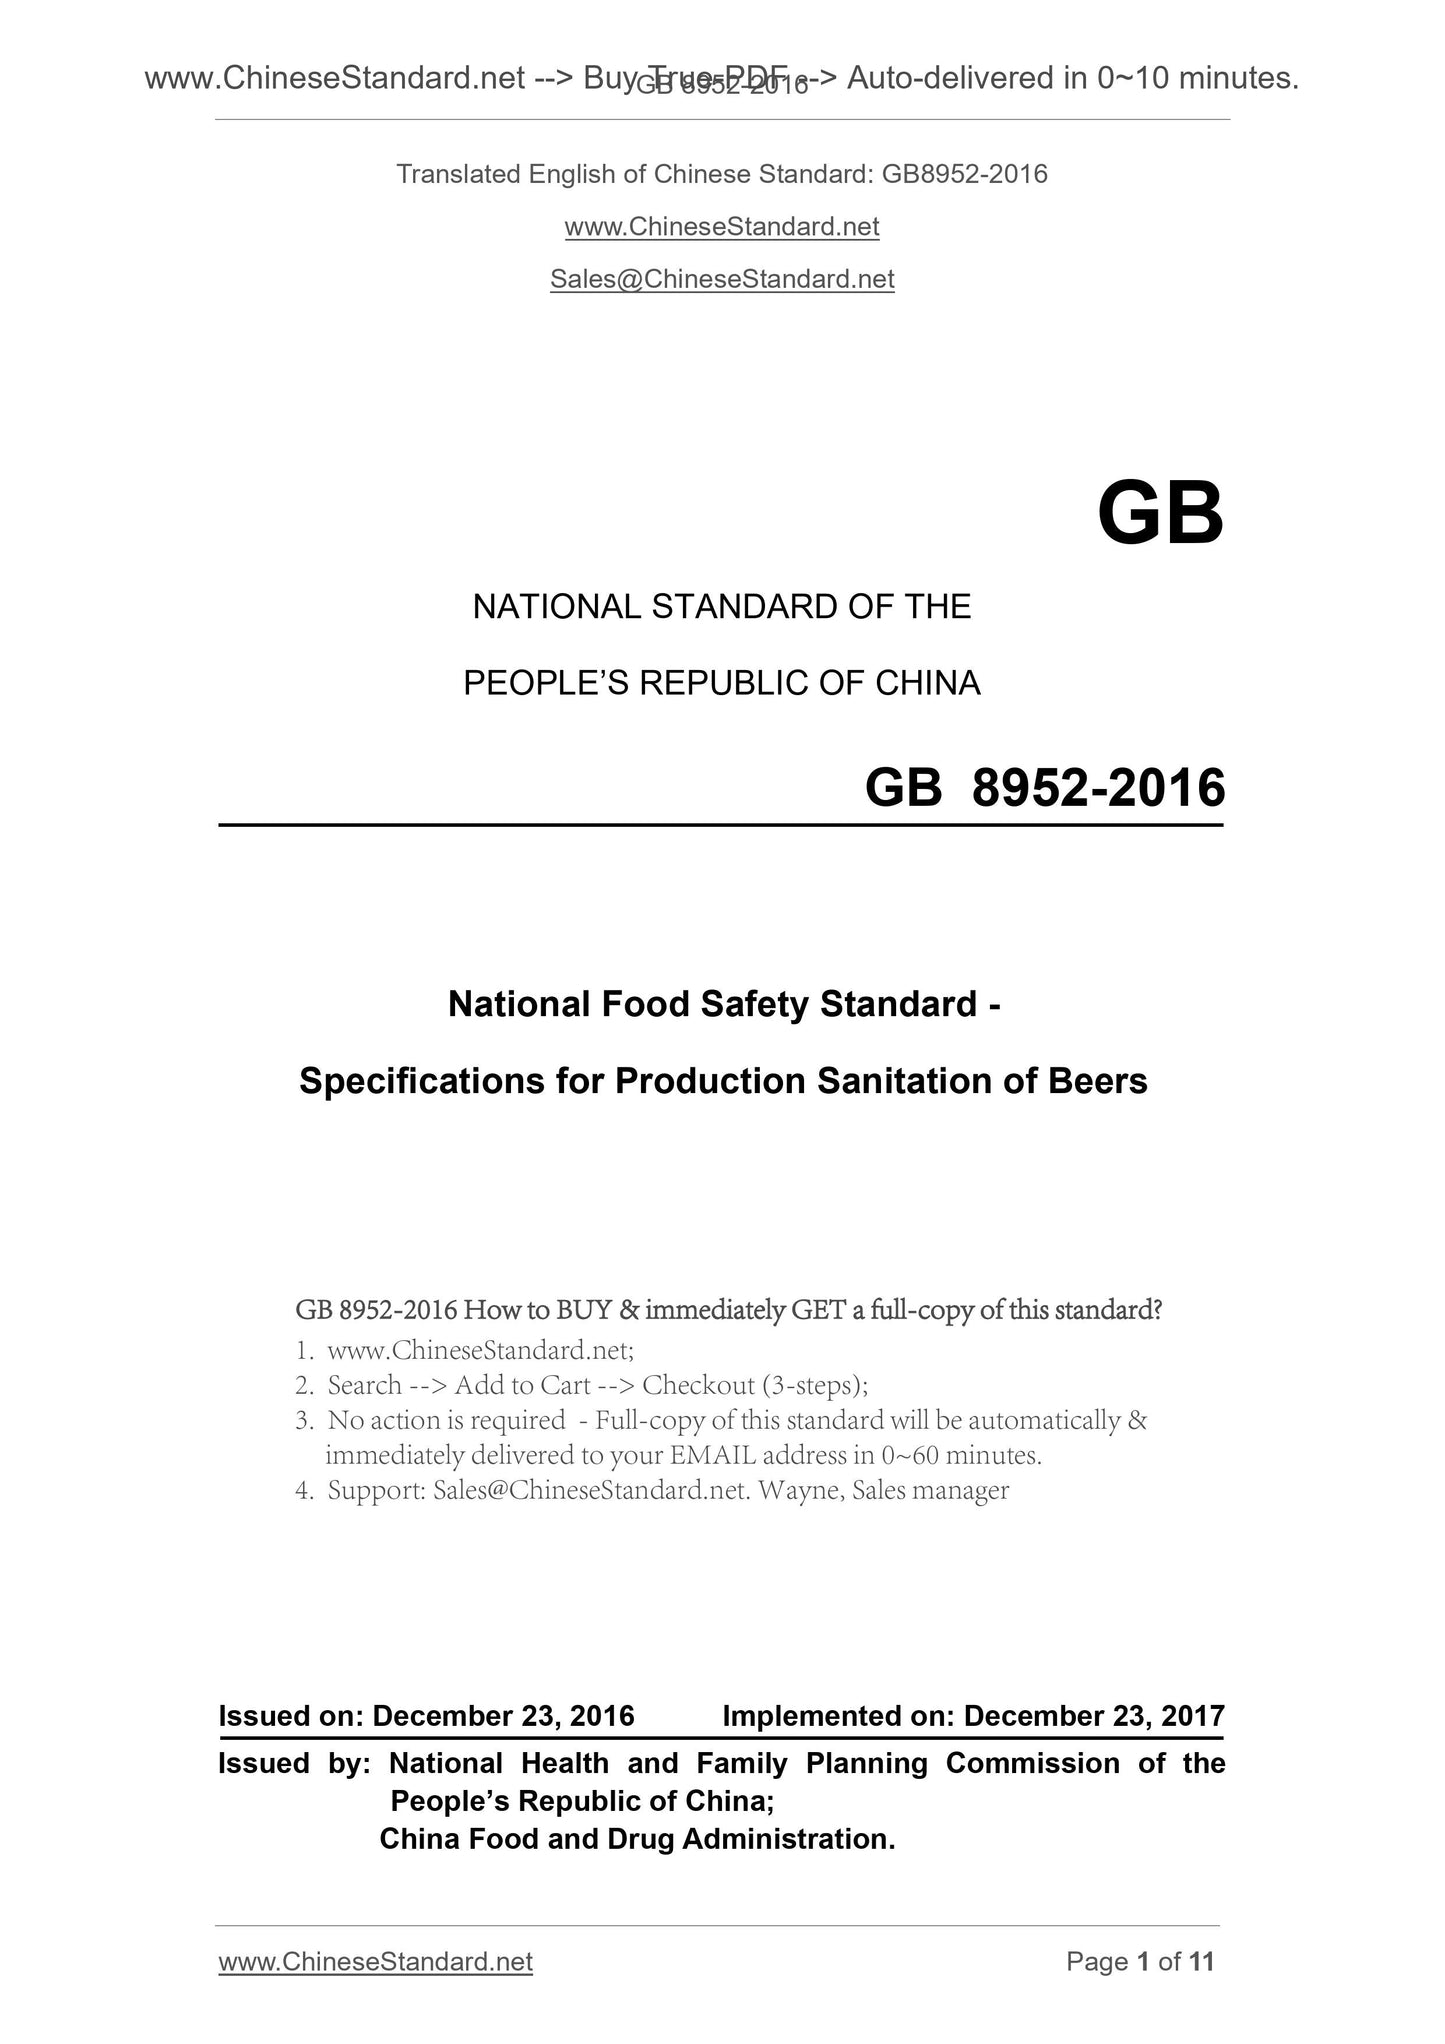 GB 8952-2016 Page 1